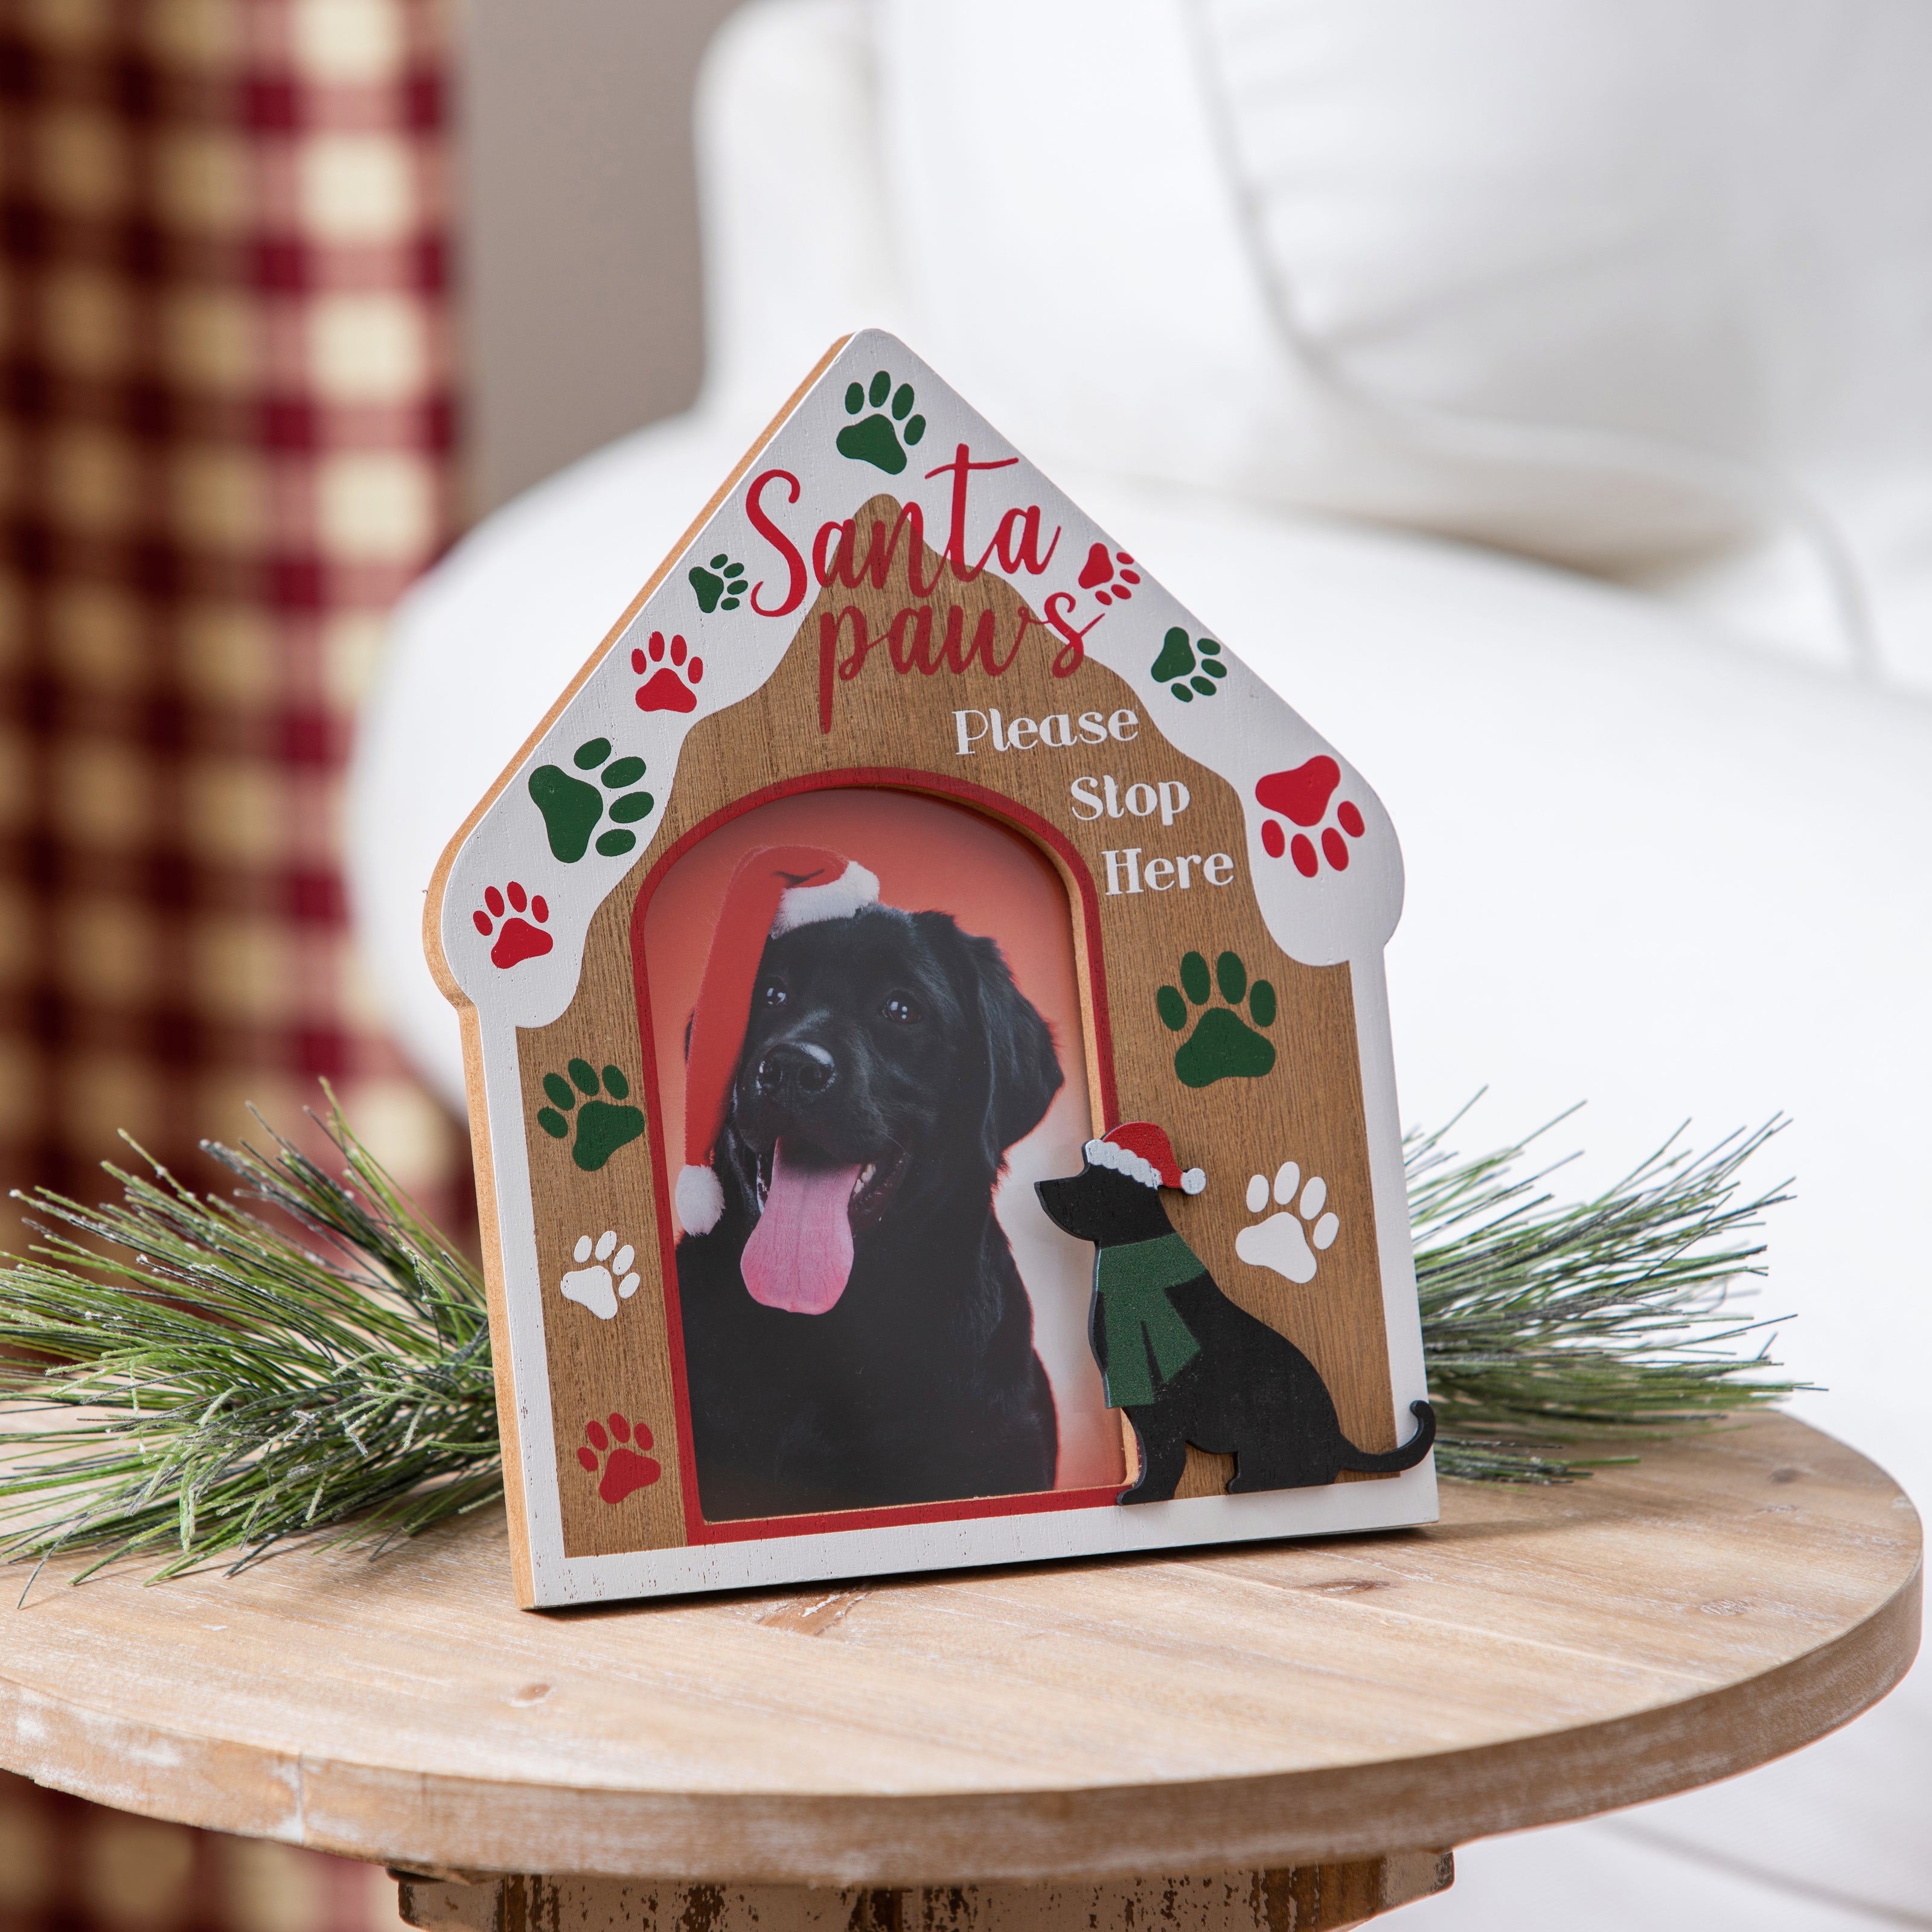 Santa Paws Please Stop Here Wood Holiday Pet Tabletop Frame